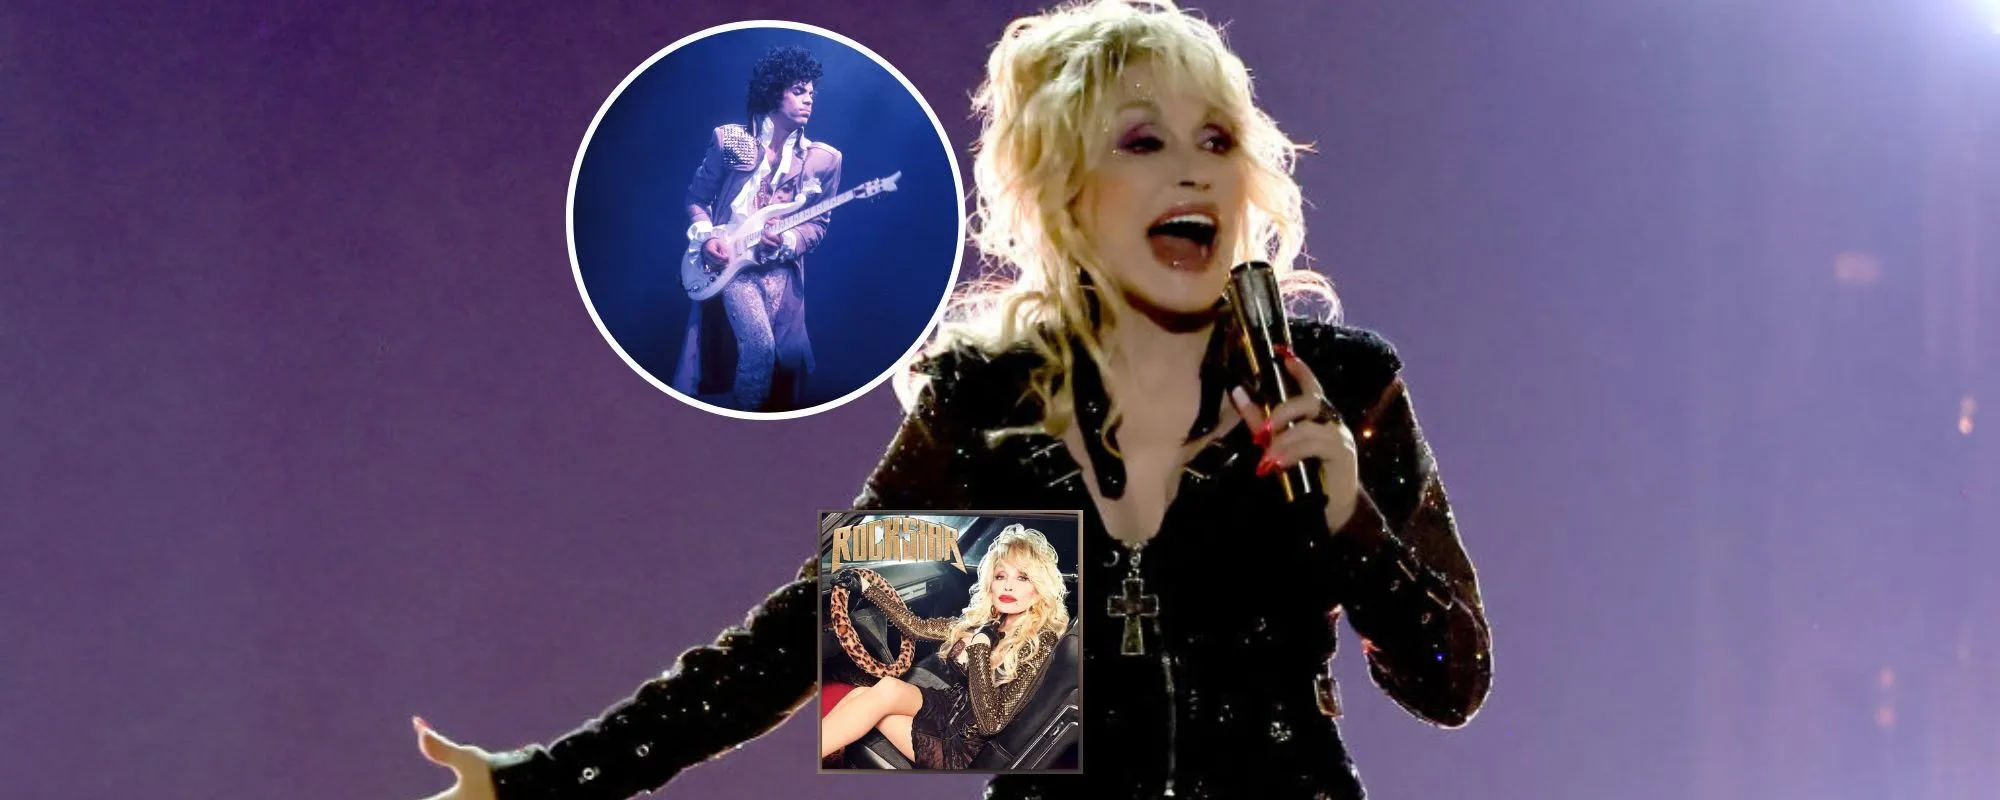 Dolly Parton Honors Prince with “Purple Rain” From New Rock Album ‘Rockstar’